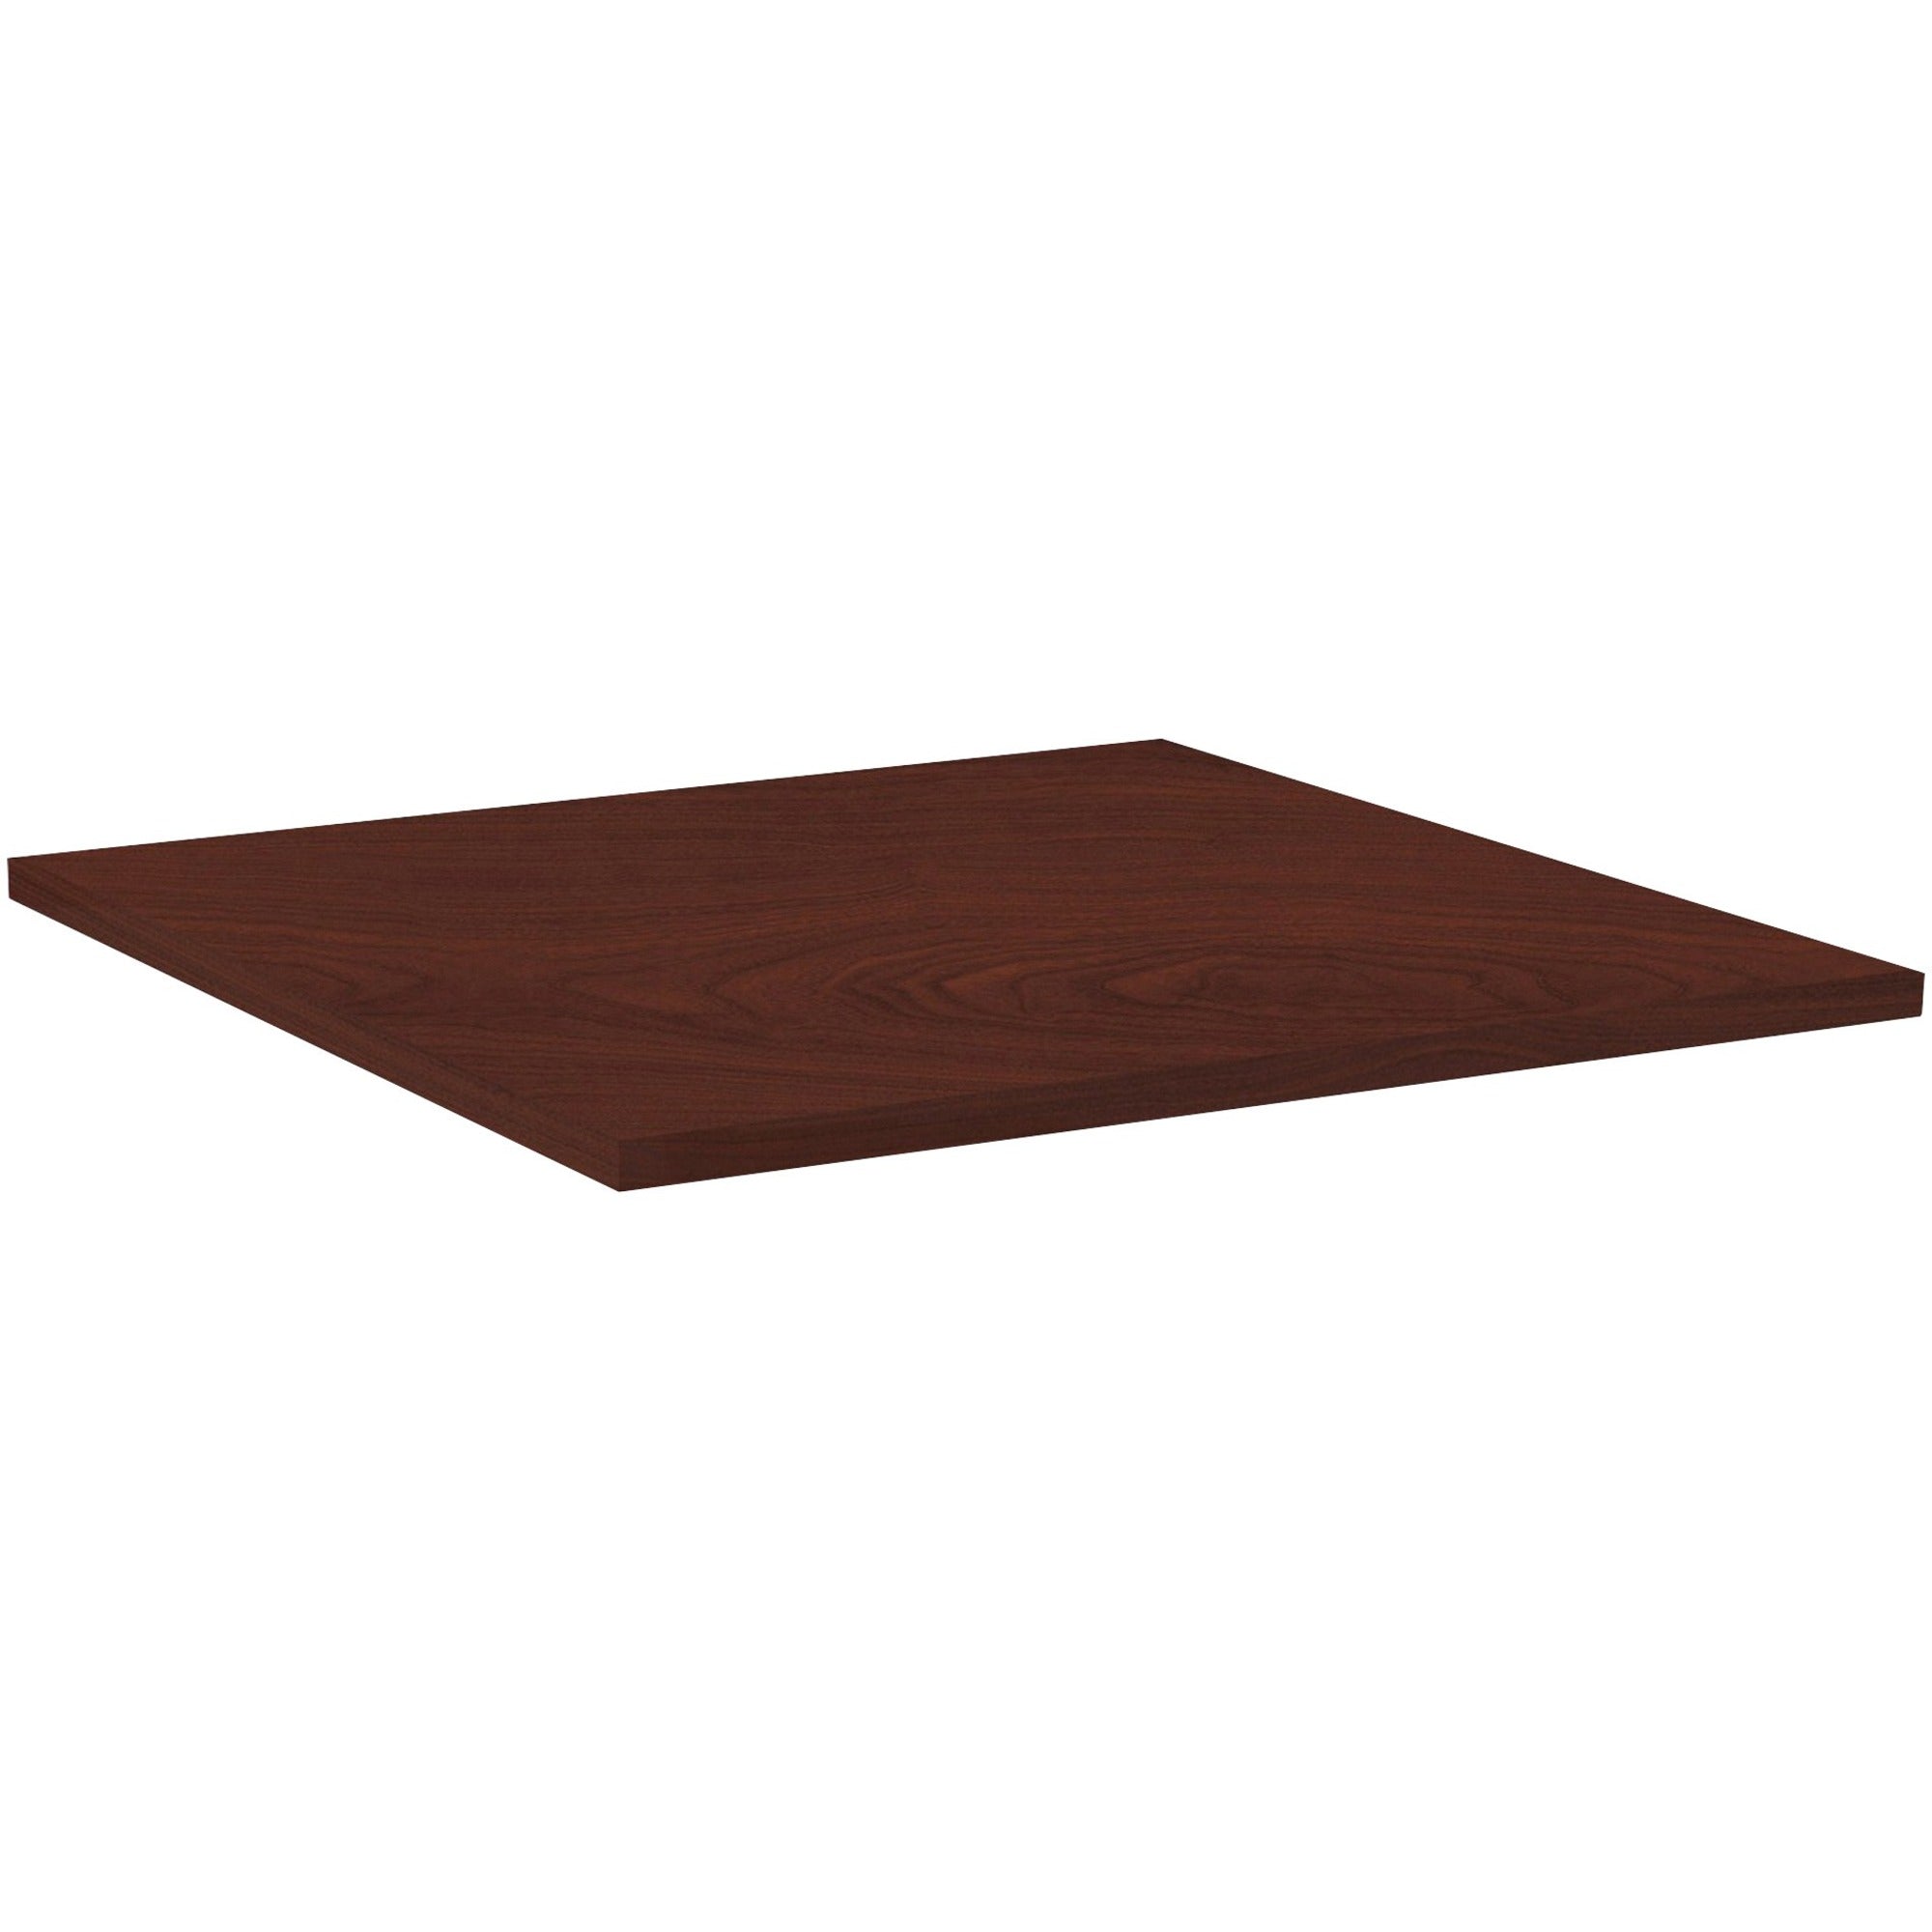 Lorell Hospitality Collection Tabletop - For - Table TopSquare Top - 36" Table Top Length x 36" Table Top Width x 1" Table Top Thickness - Assembly Required - High Pressure Laminate (HPL), Mahogany - 1 Each - 